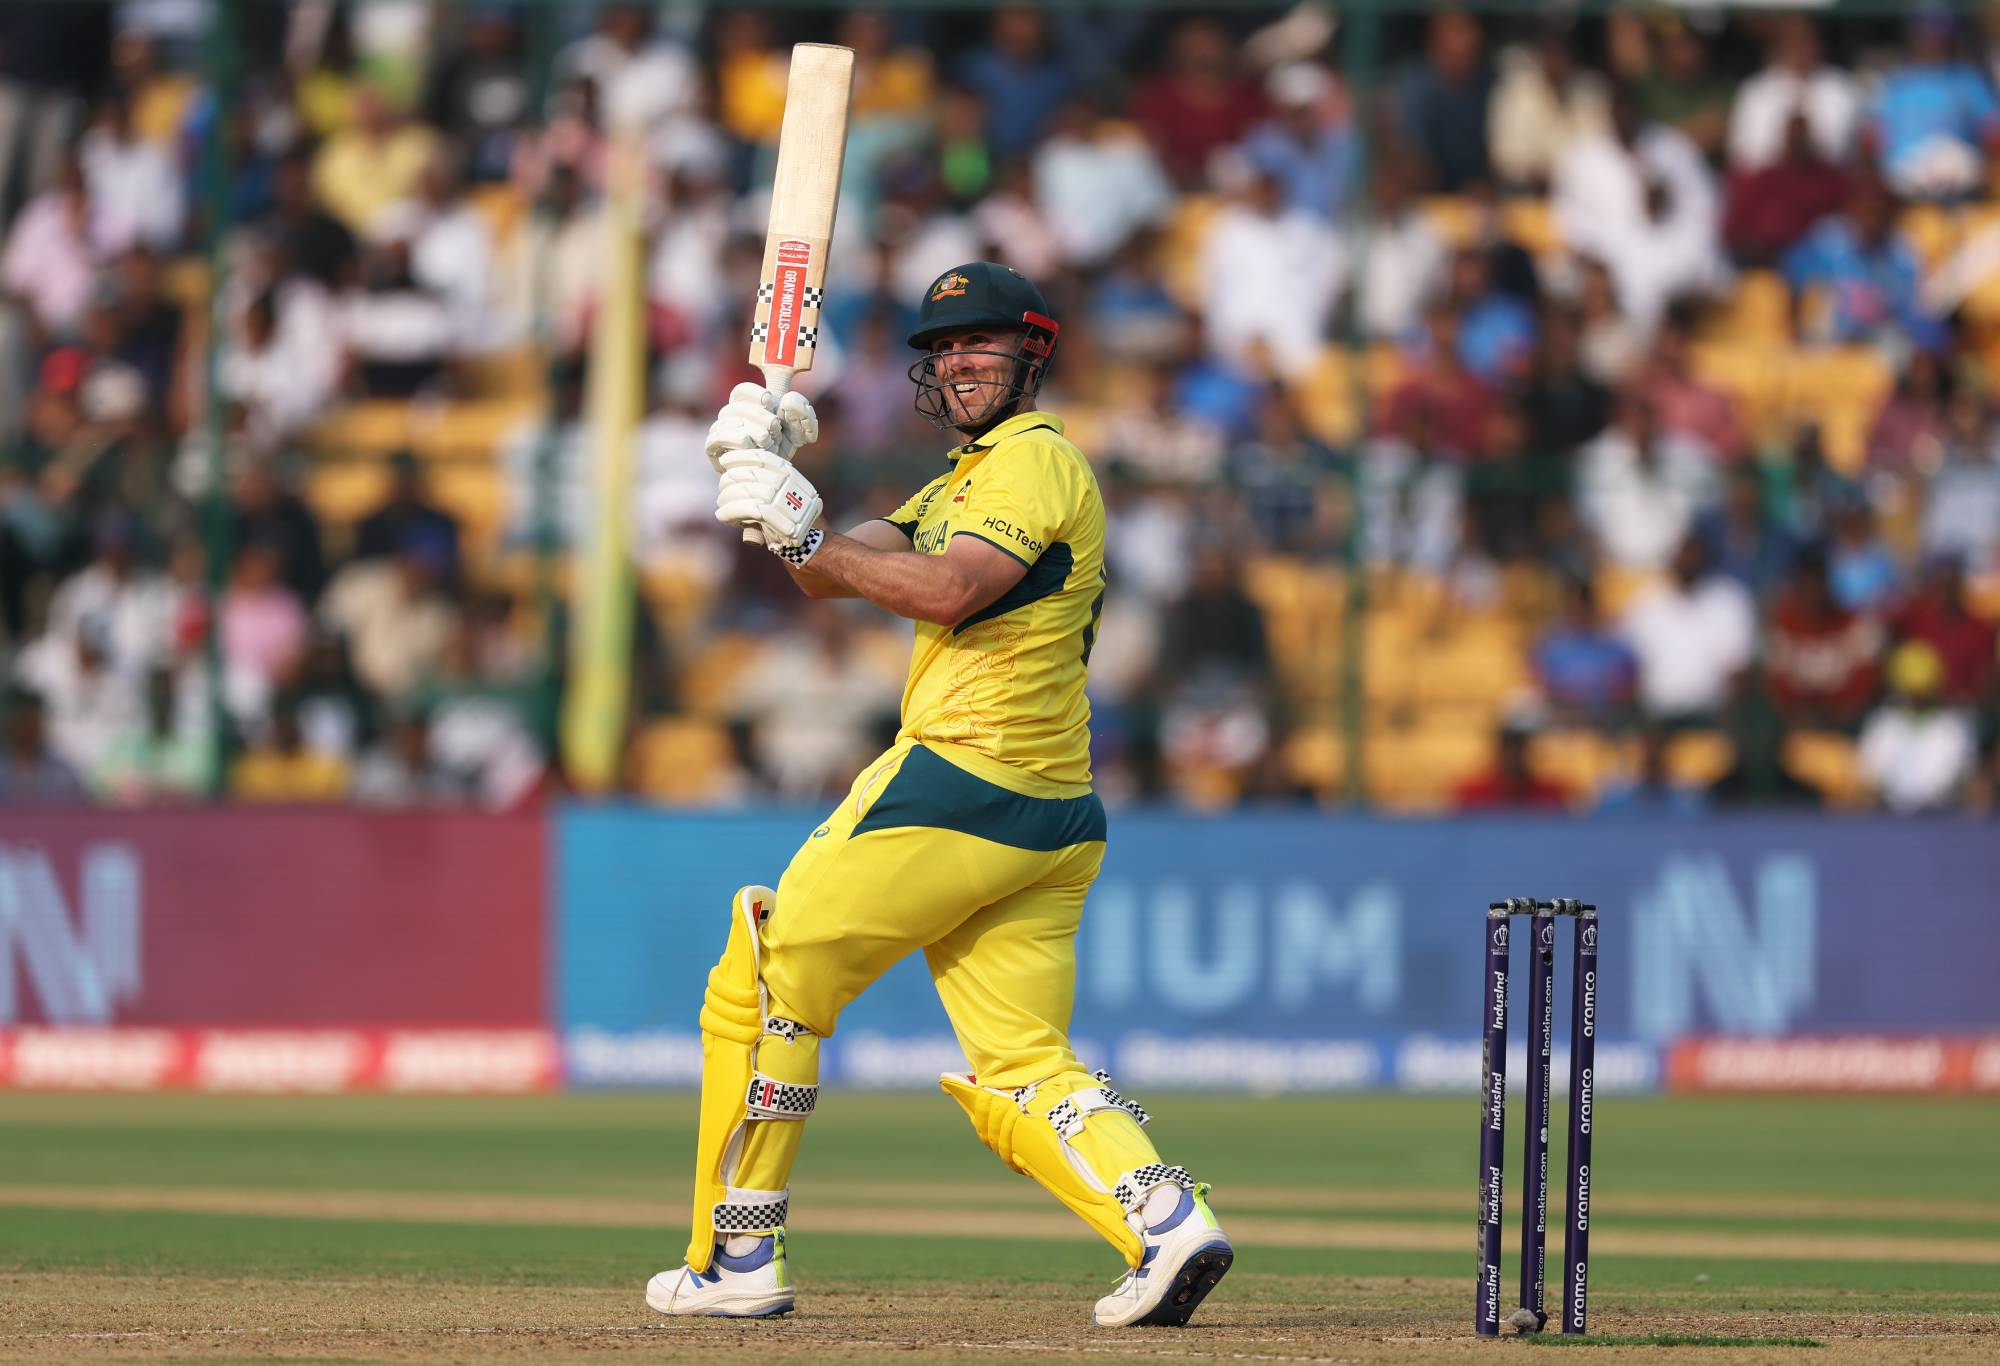 BANGALORE, INDIA - OCTOBER 20: Mitch Marsh of Australia plays a shot during the ICC Men's Cricket World Cup India 2023 between Australia and Pakistan at M. Chinnaswamy Stadium on October 20, 2023 in Bangalore, India. (Photo by Matthew Lewis-ICC/ICC via Getty Images)